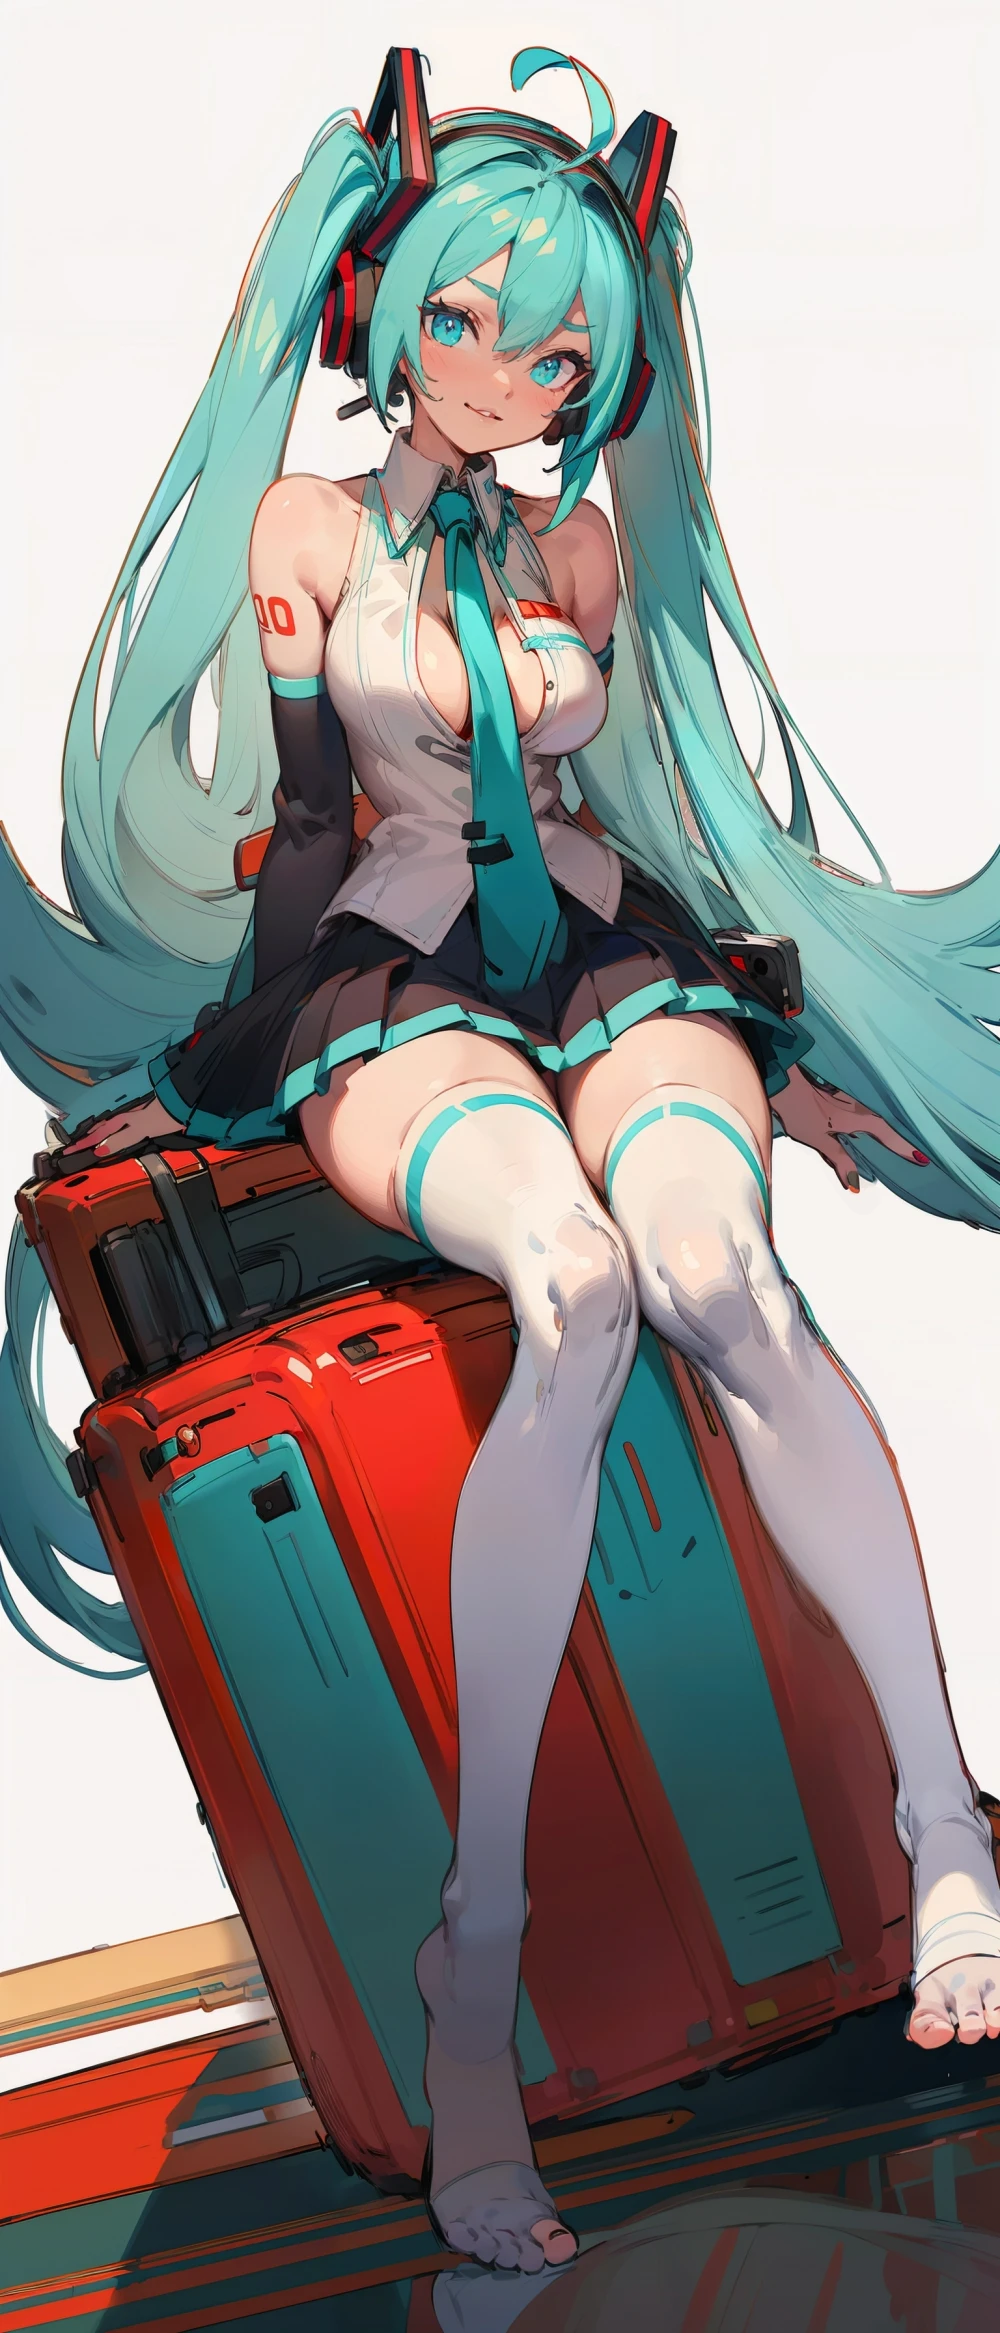 hatsune-miku-anime-style-all-ages-2-34